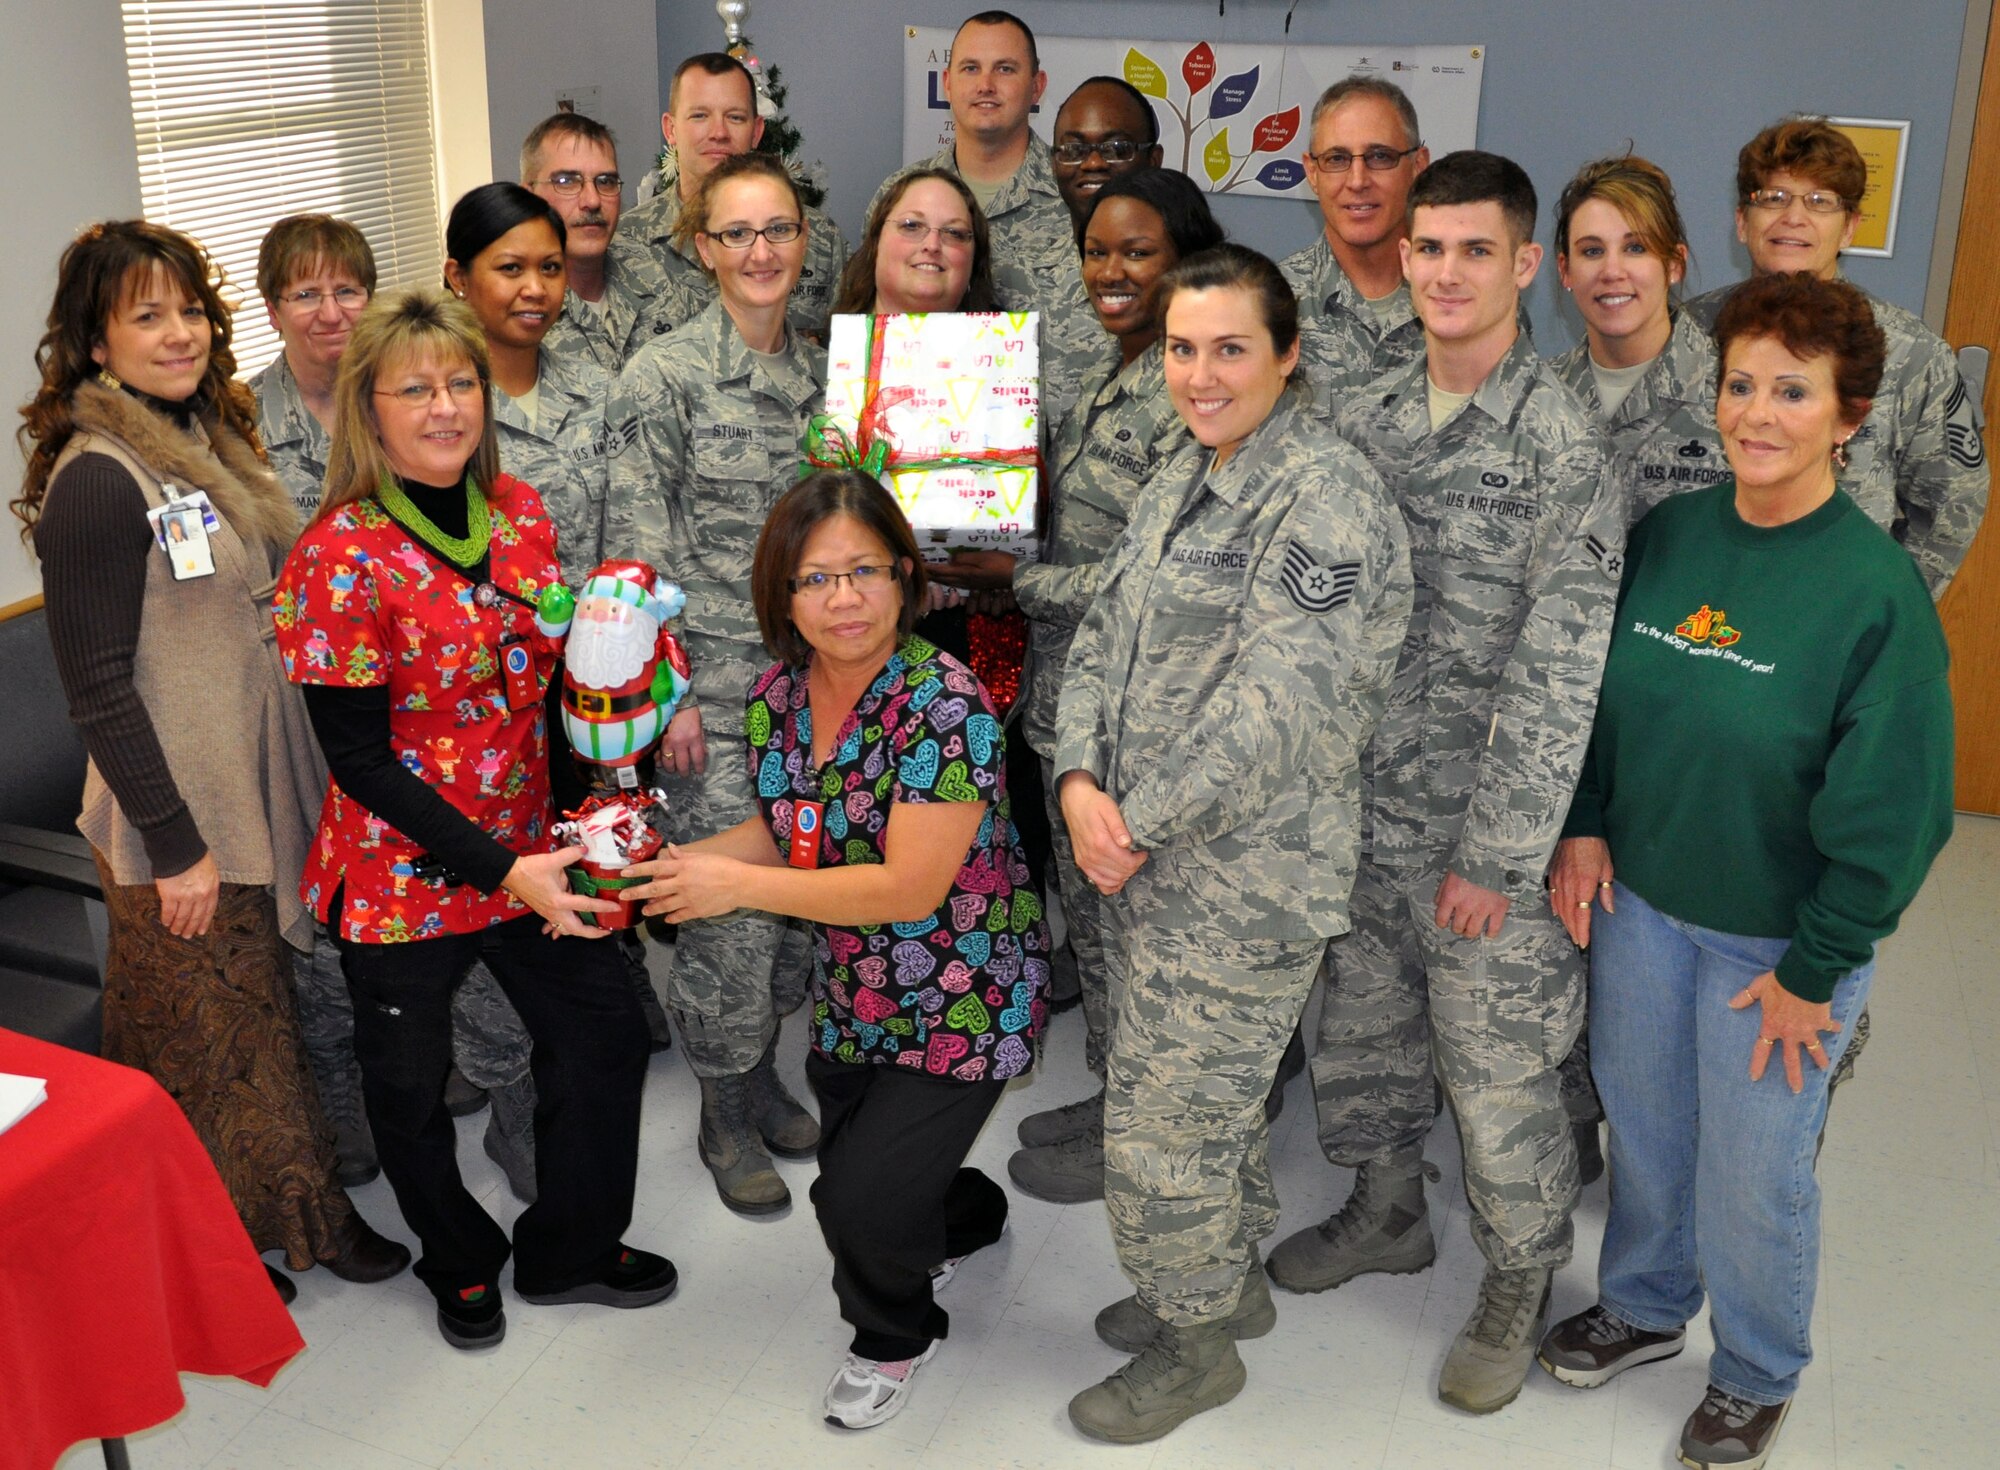 Members of the 931st Air Refueling Group, McConnell Air Force Base, Kan., pose with staff members from the Robert J. Dole Veterans Medical Center in Wichita, Kan., Dec. 12, 2012.  The staff at the medical center held a holiday open house celebration, during which they collected donations for McConnell Airmen and their families who are in need during the holiday season.  (U.S. Air Force photo by 1st Lt. Zach Anderson)